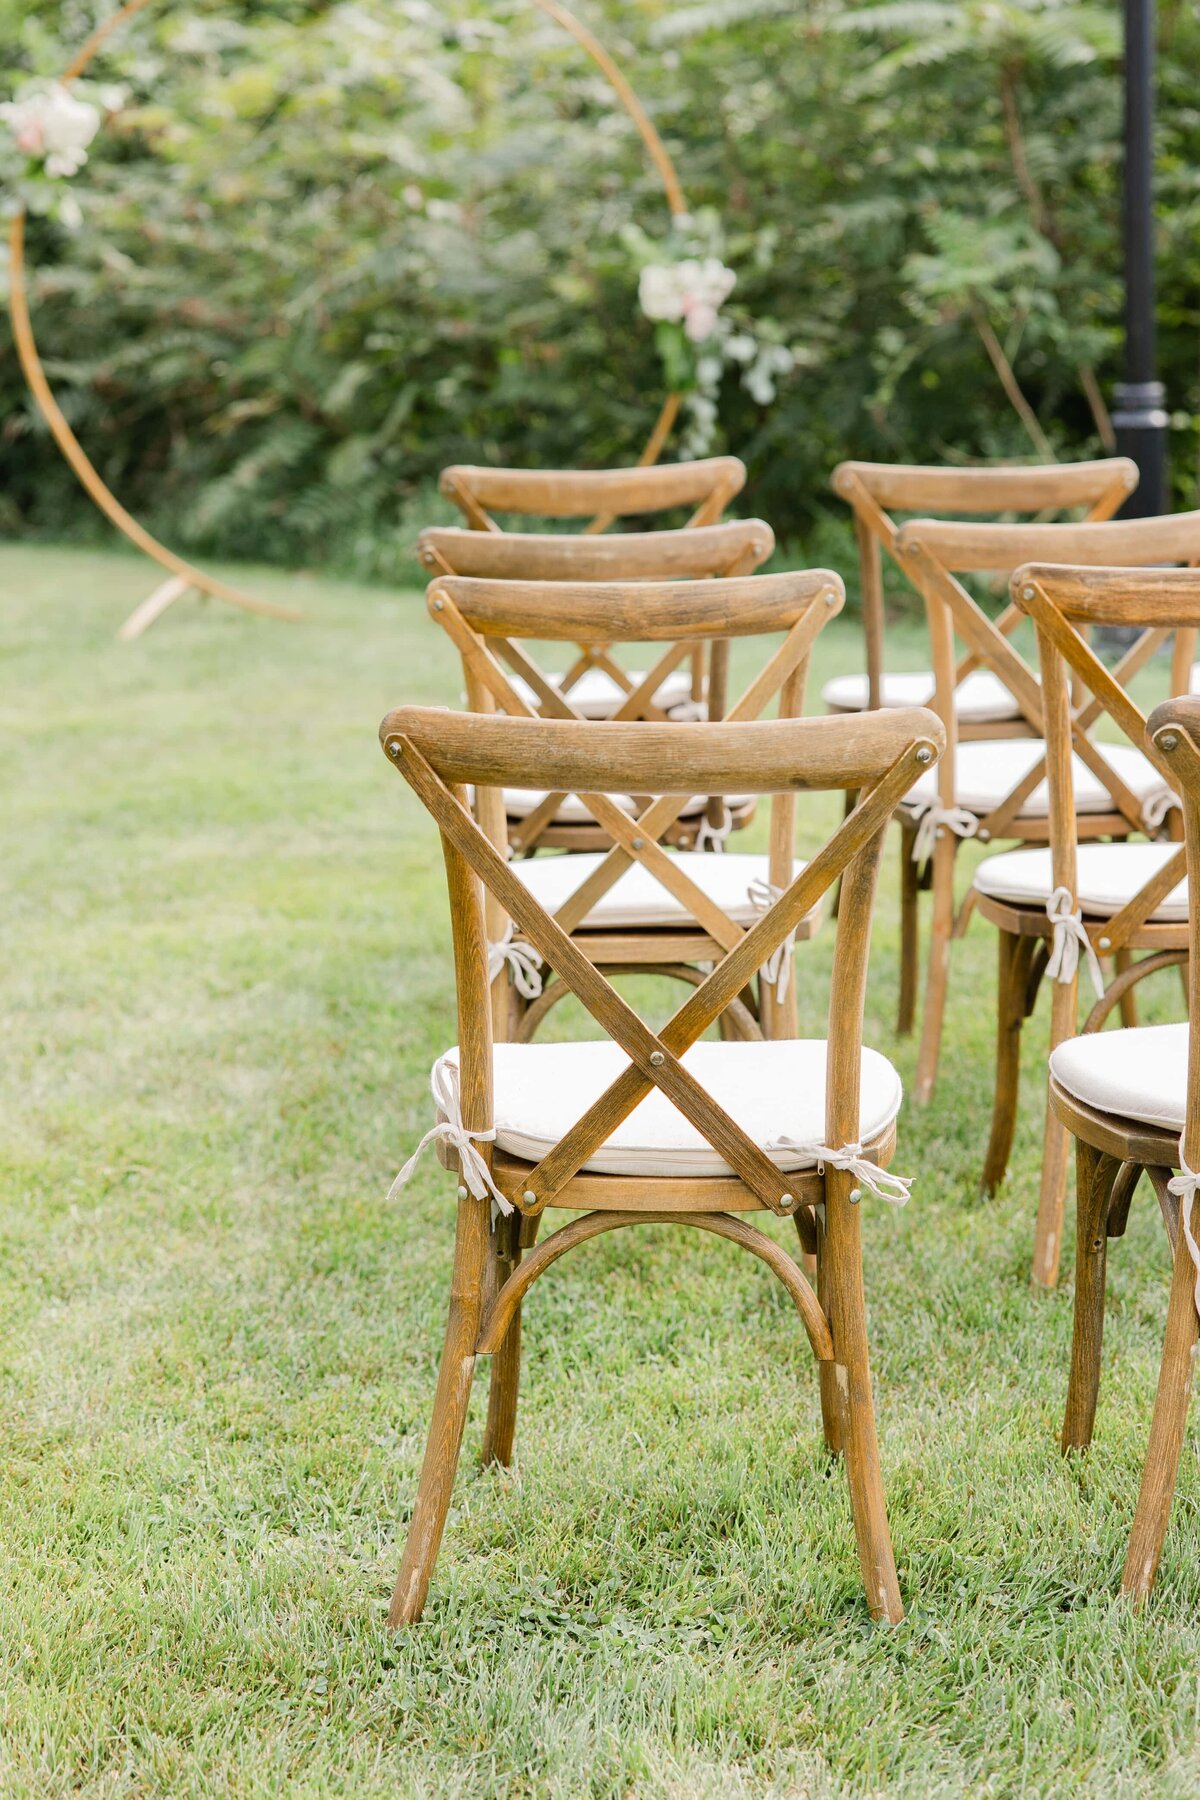 Wooden chairs with white cushions arranged on a lawn for an outdoor event in Iowa, with floral decorations visible in the background.